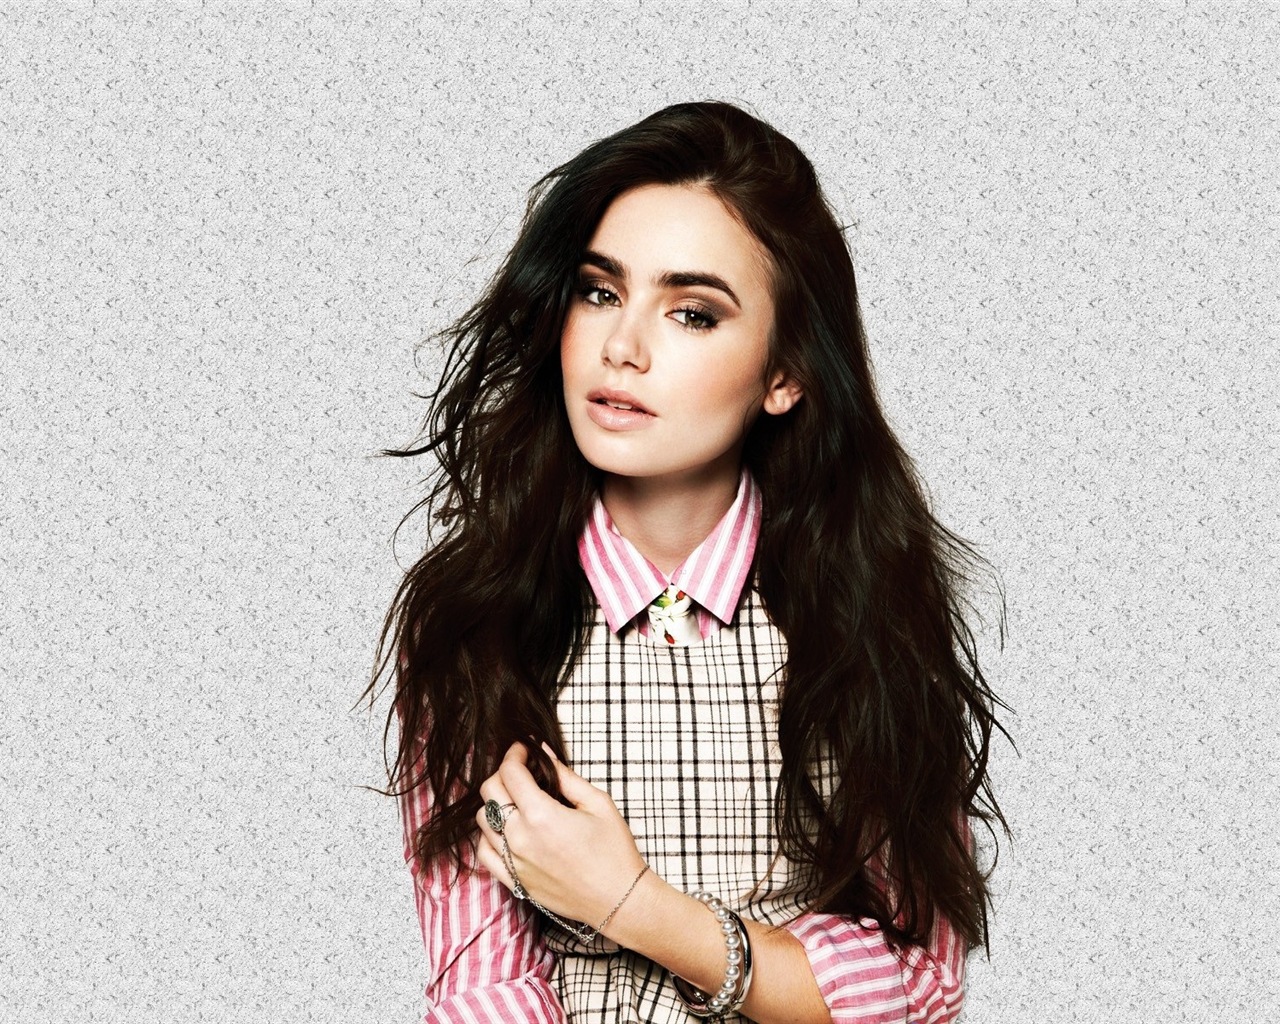 Lily Collins beautiful wallpapers #9 - 1280x1024